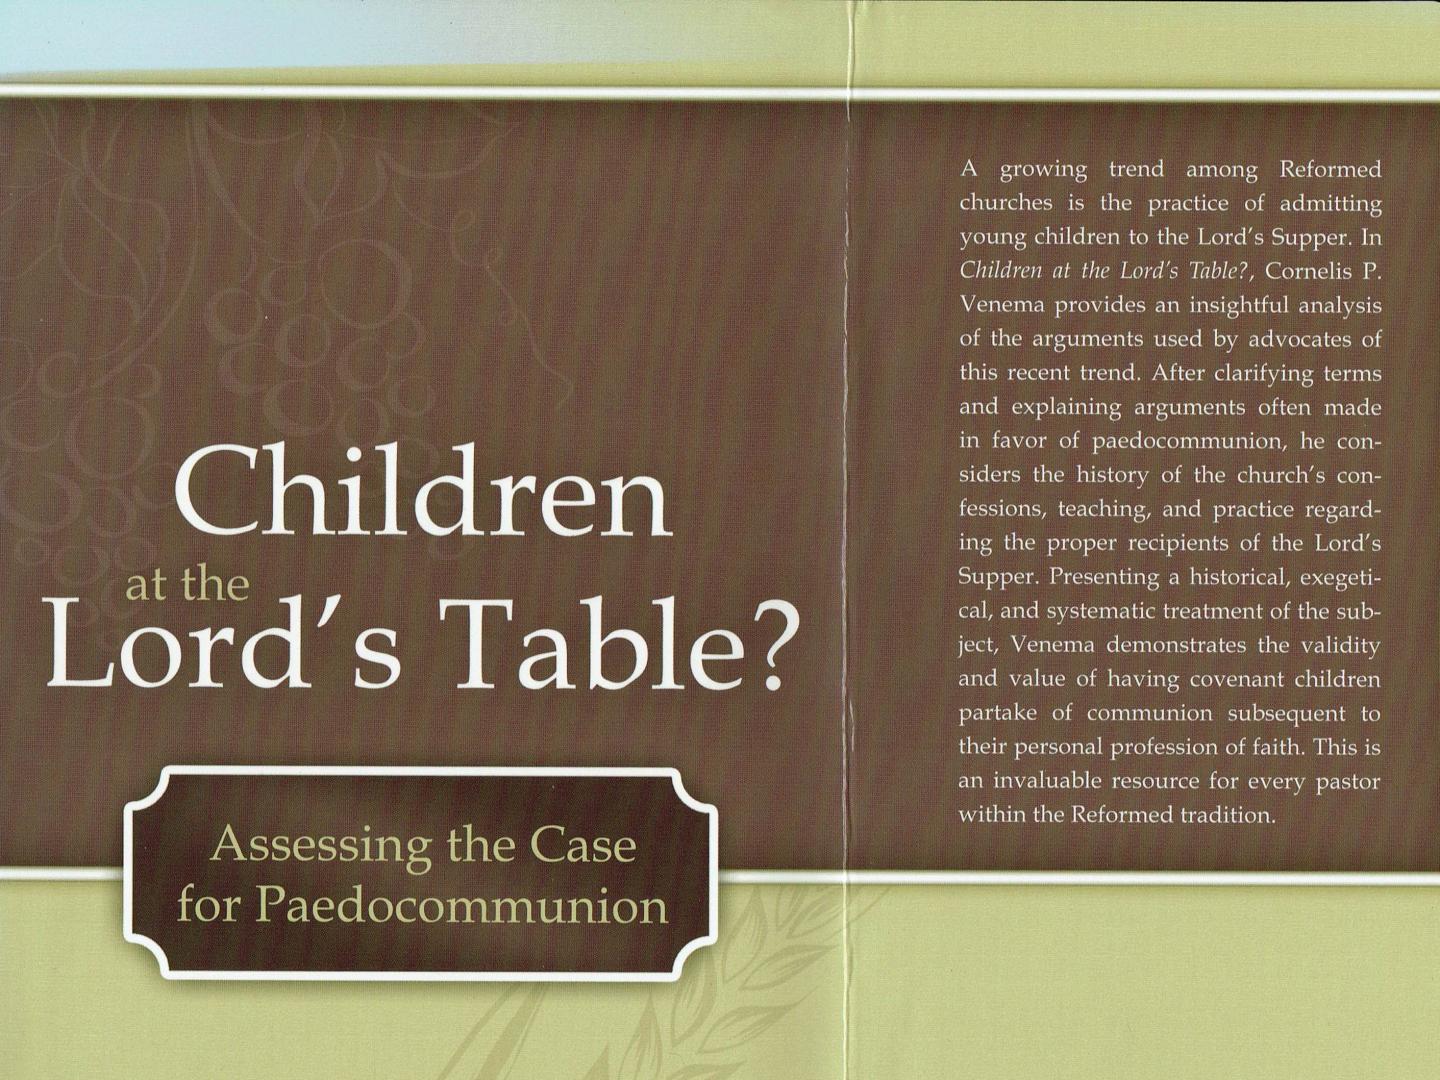 VENEMA, Cornelis P. - Children at the Lord's Table? - Assessing the Case for Paedocommunion